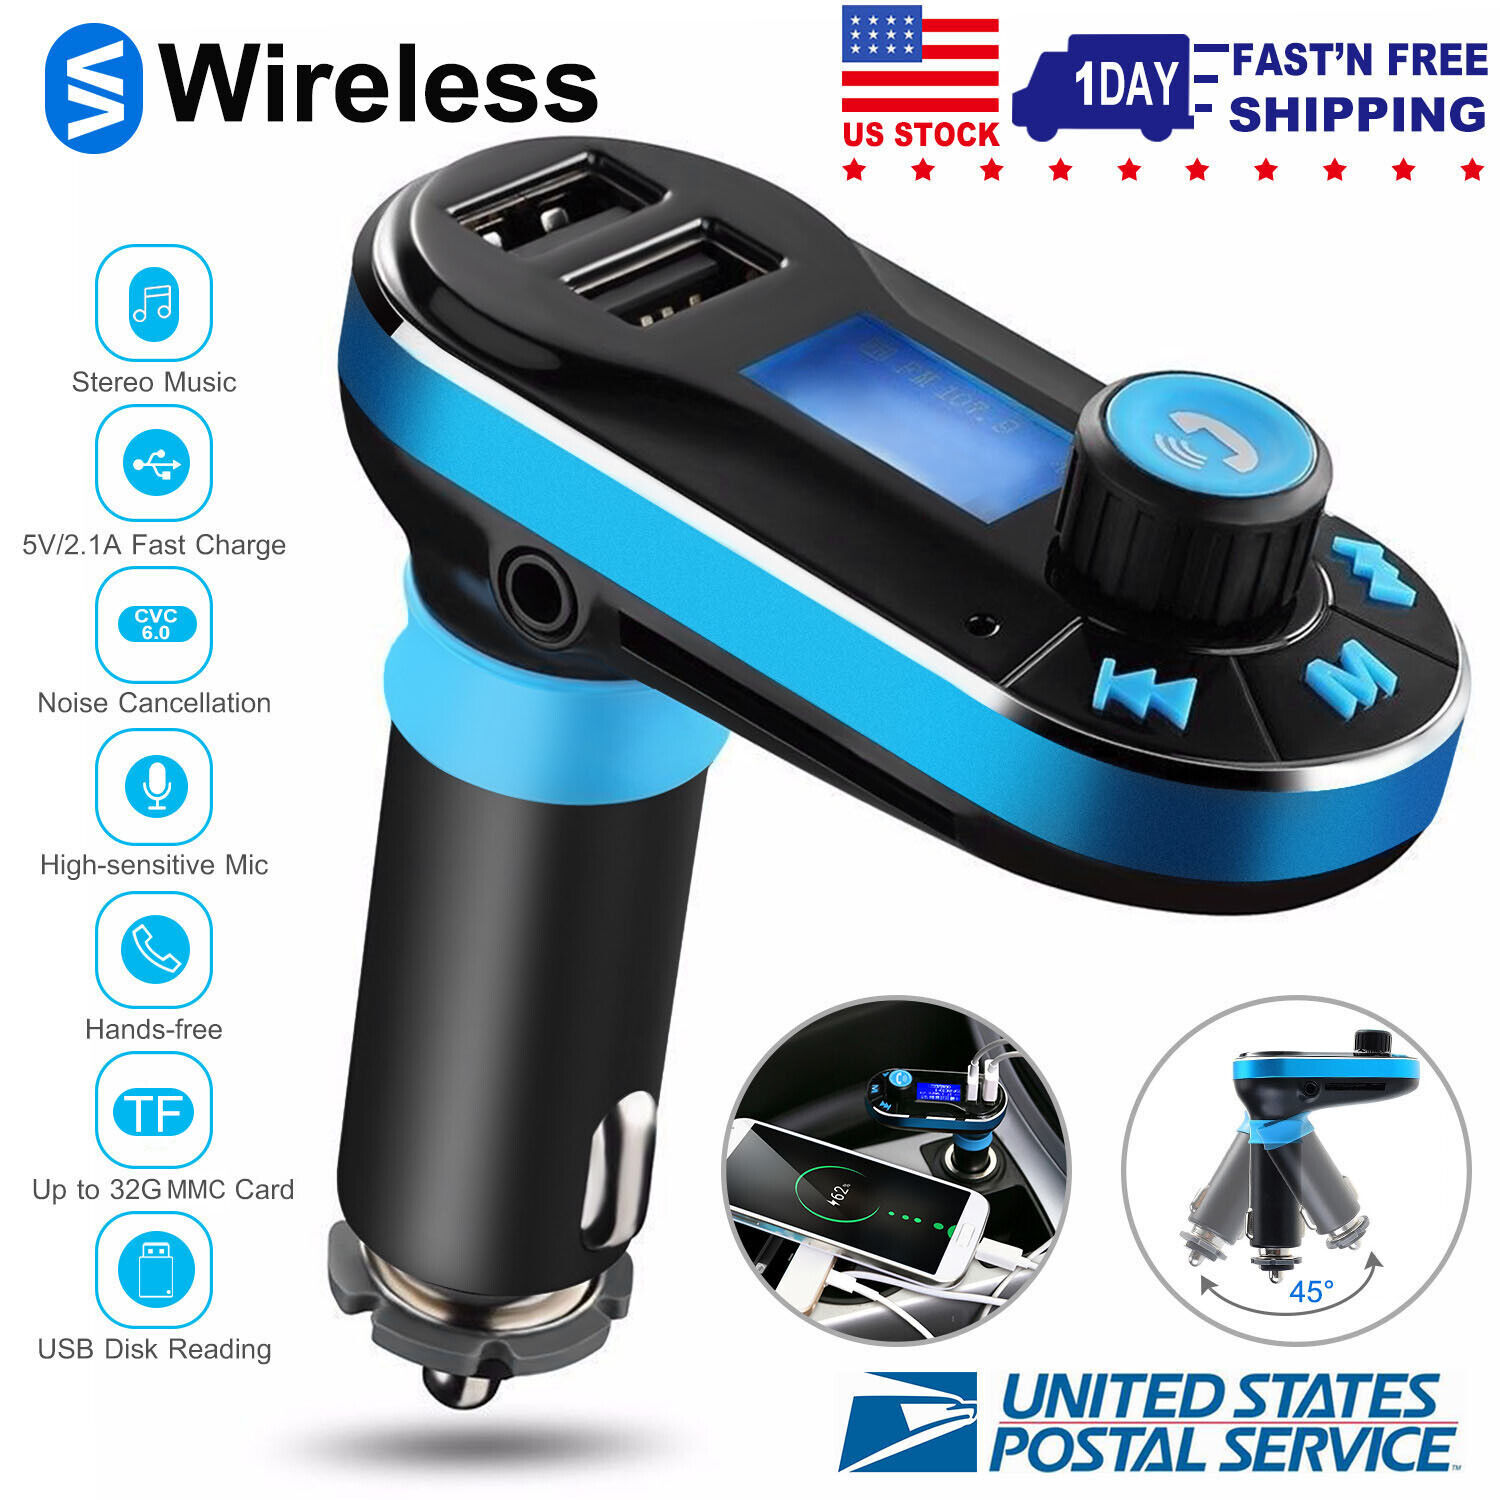 Car FM Transmitter Handsfree Wireless MP3 Player Radio Adapter Dual USB Charger iMounTEK Does Not Apply